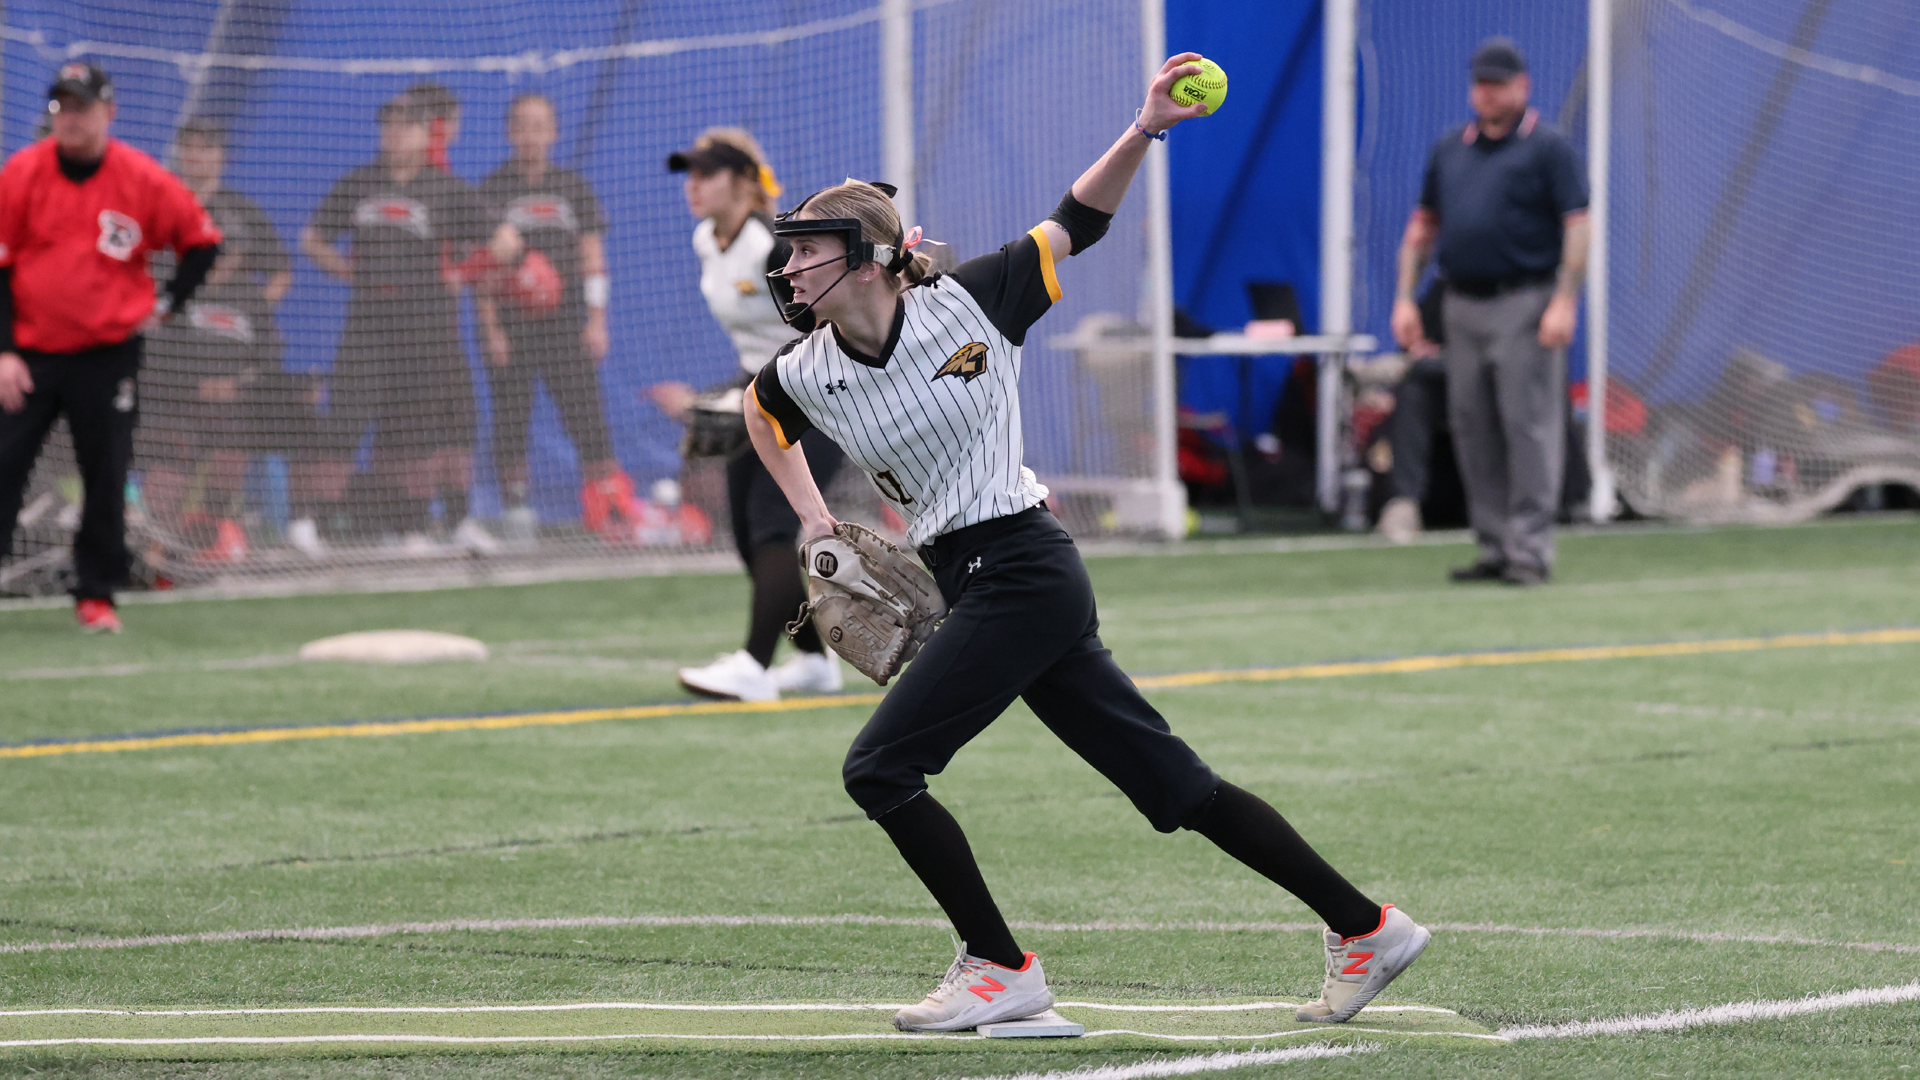 Mia Crotty (pictured) and Brianna Bougie combined for the 12th no-hitter in program history in the Titans' 8-0 win over Ripon on Sunday. Photo Credit: Steve Frommell, UW-Oshkosh Sports Information